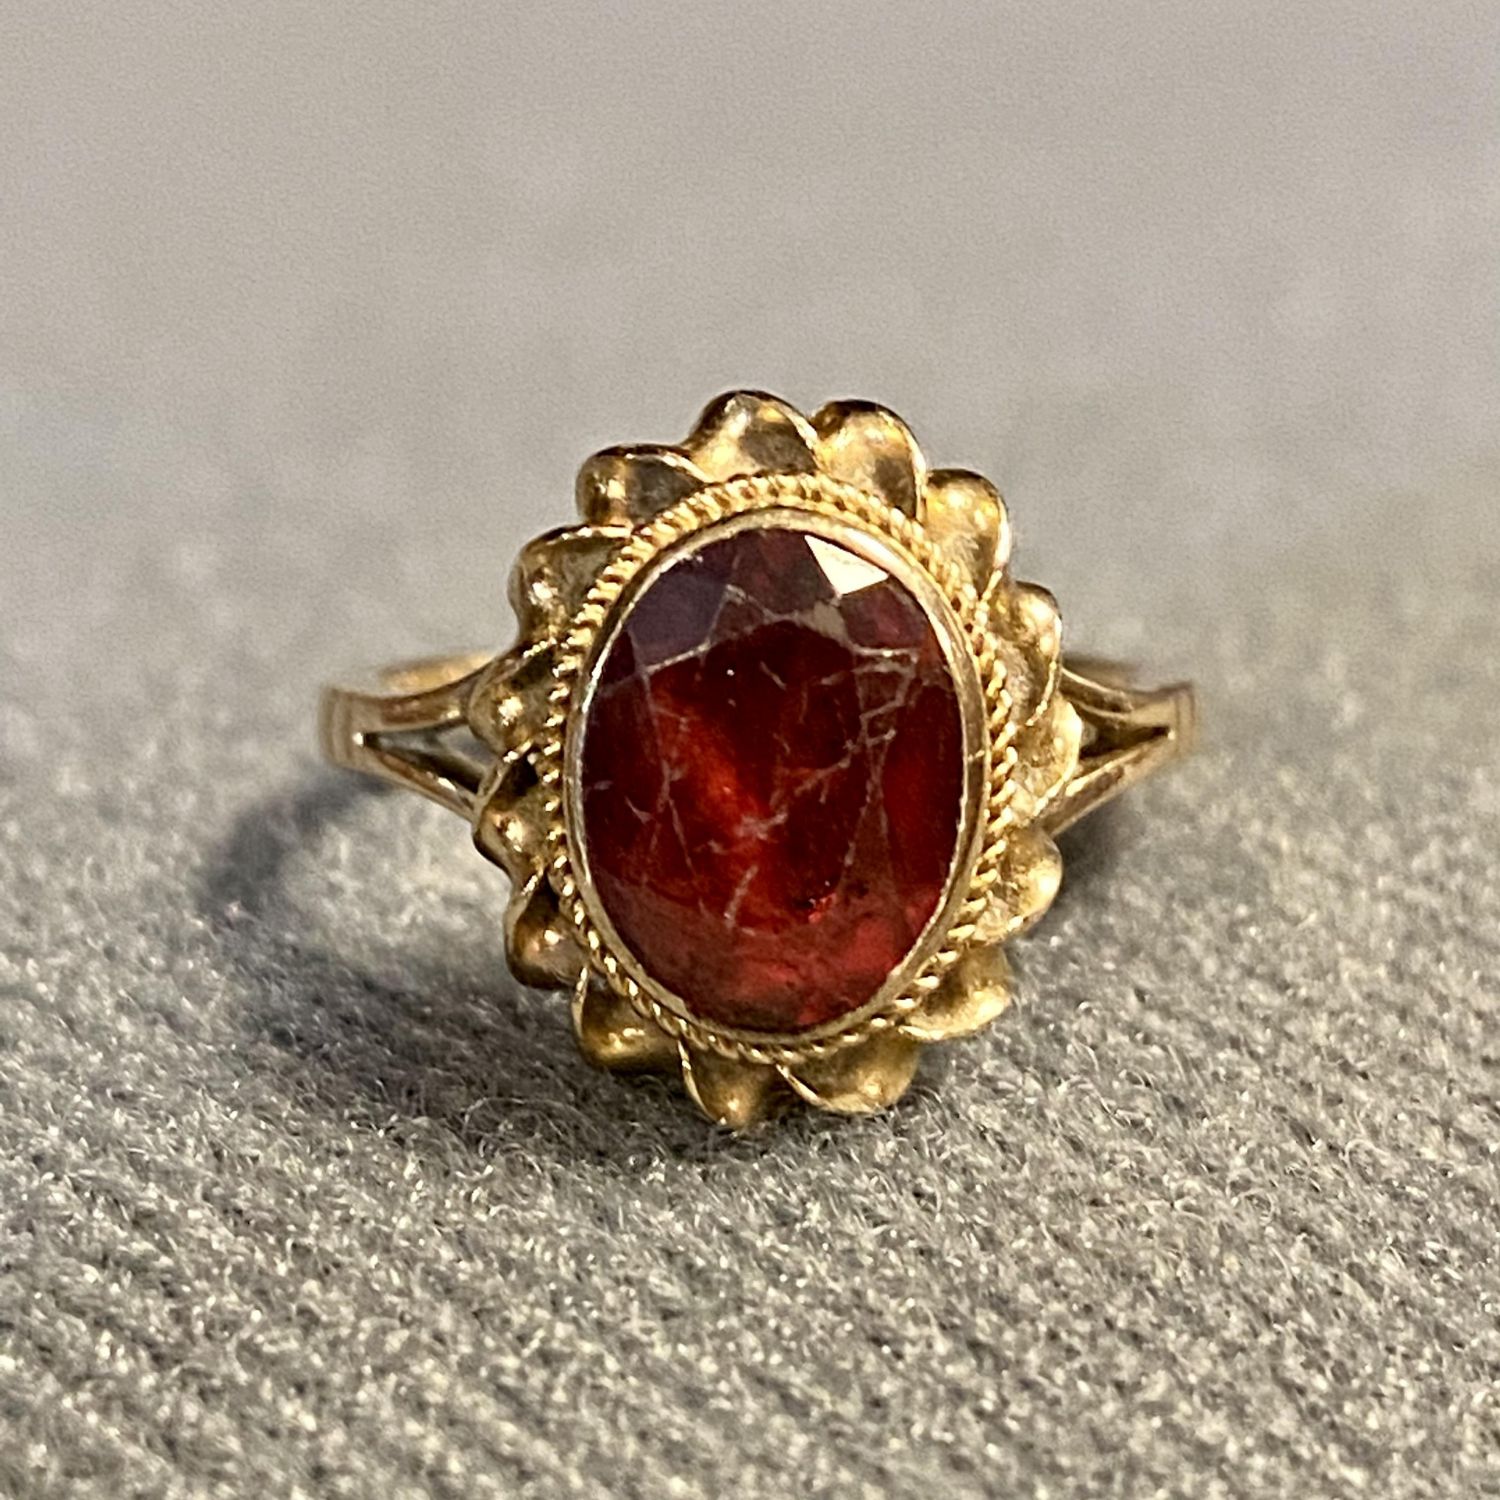 Vintage 9ct Gold Garnet Ring - Jewellery & Gold - Hemswell Antique Centres